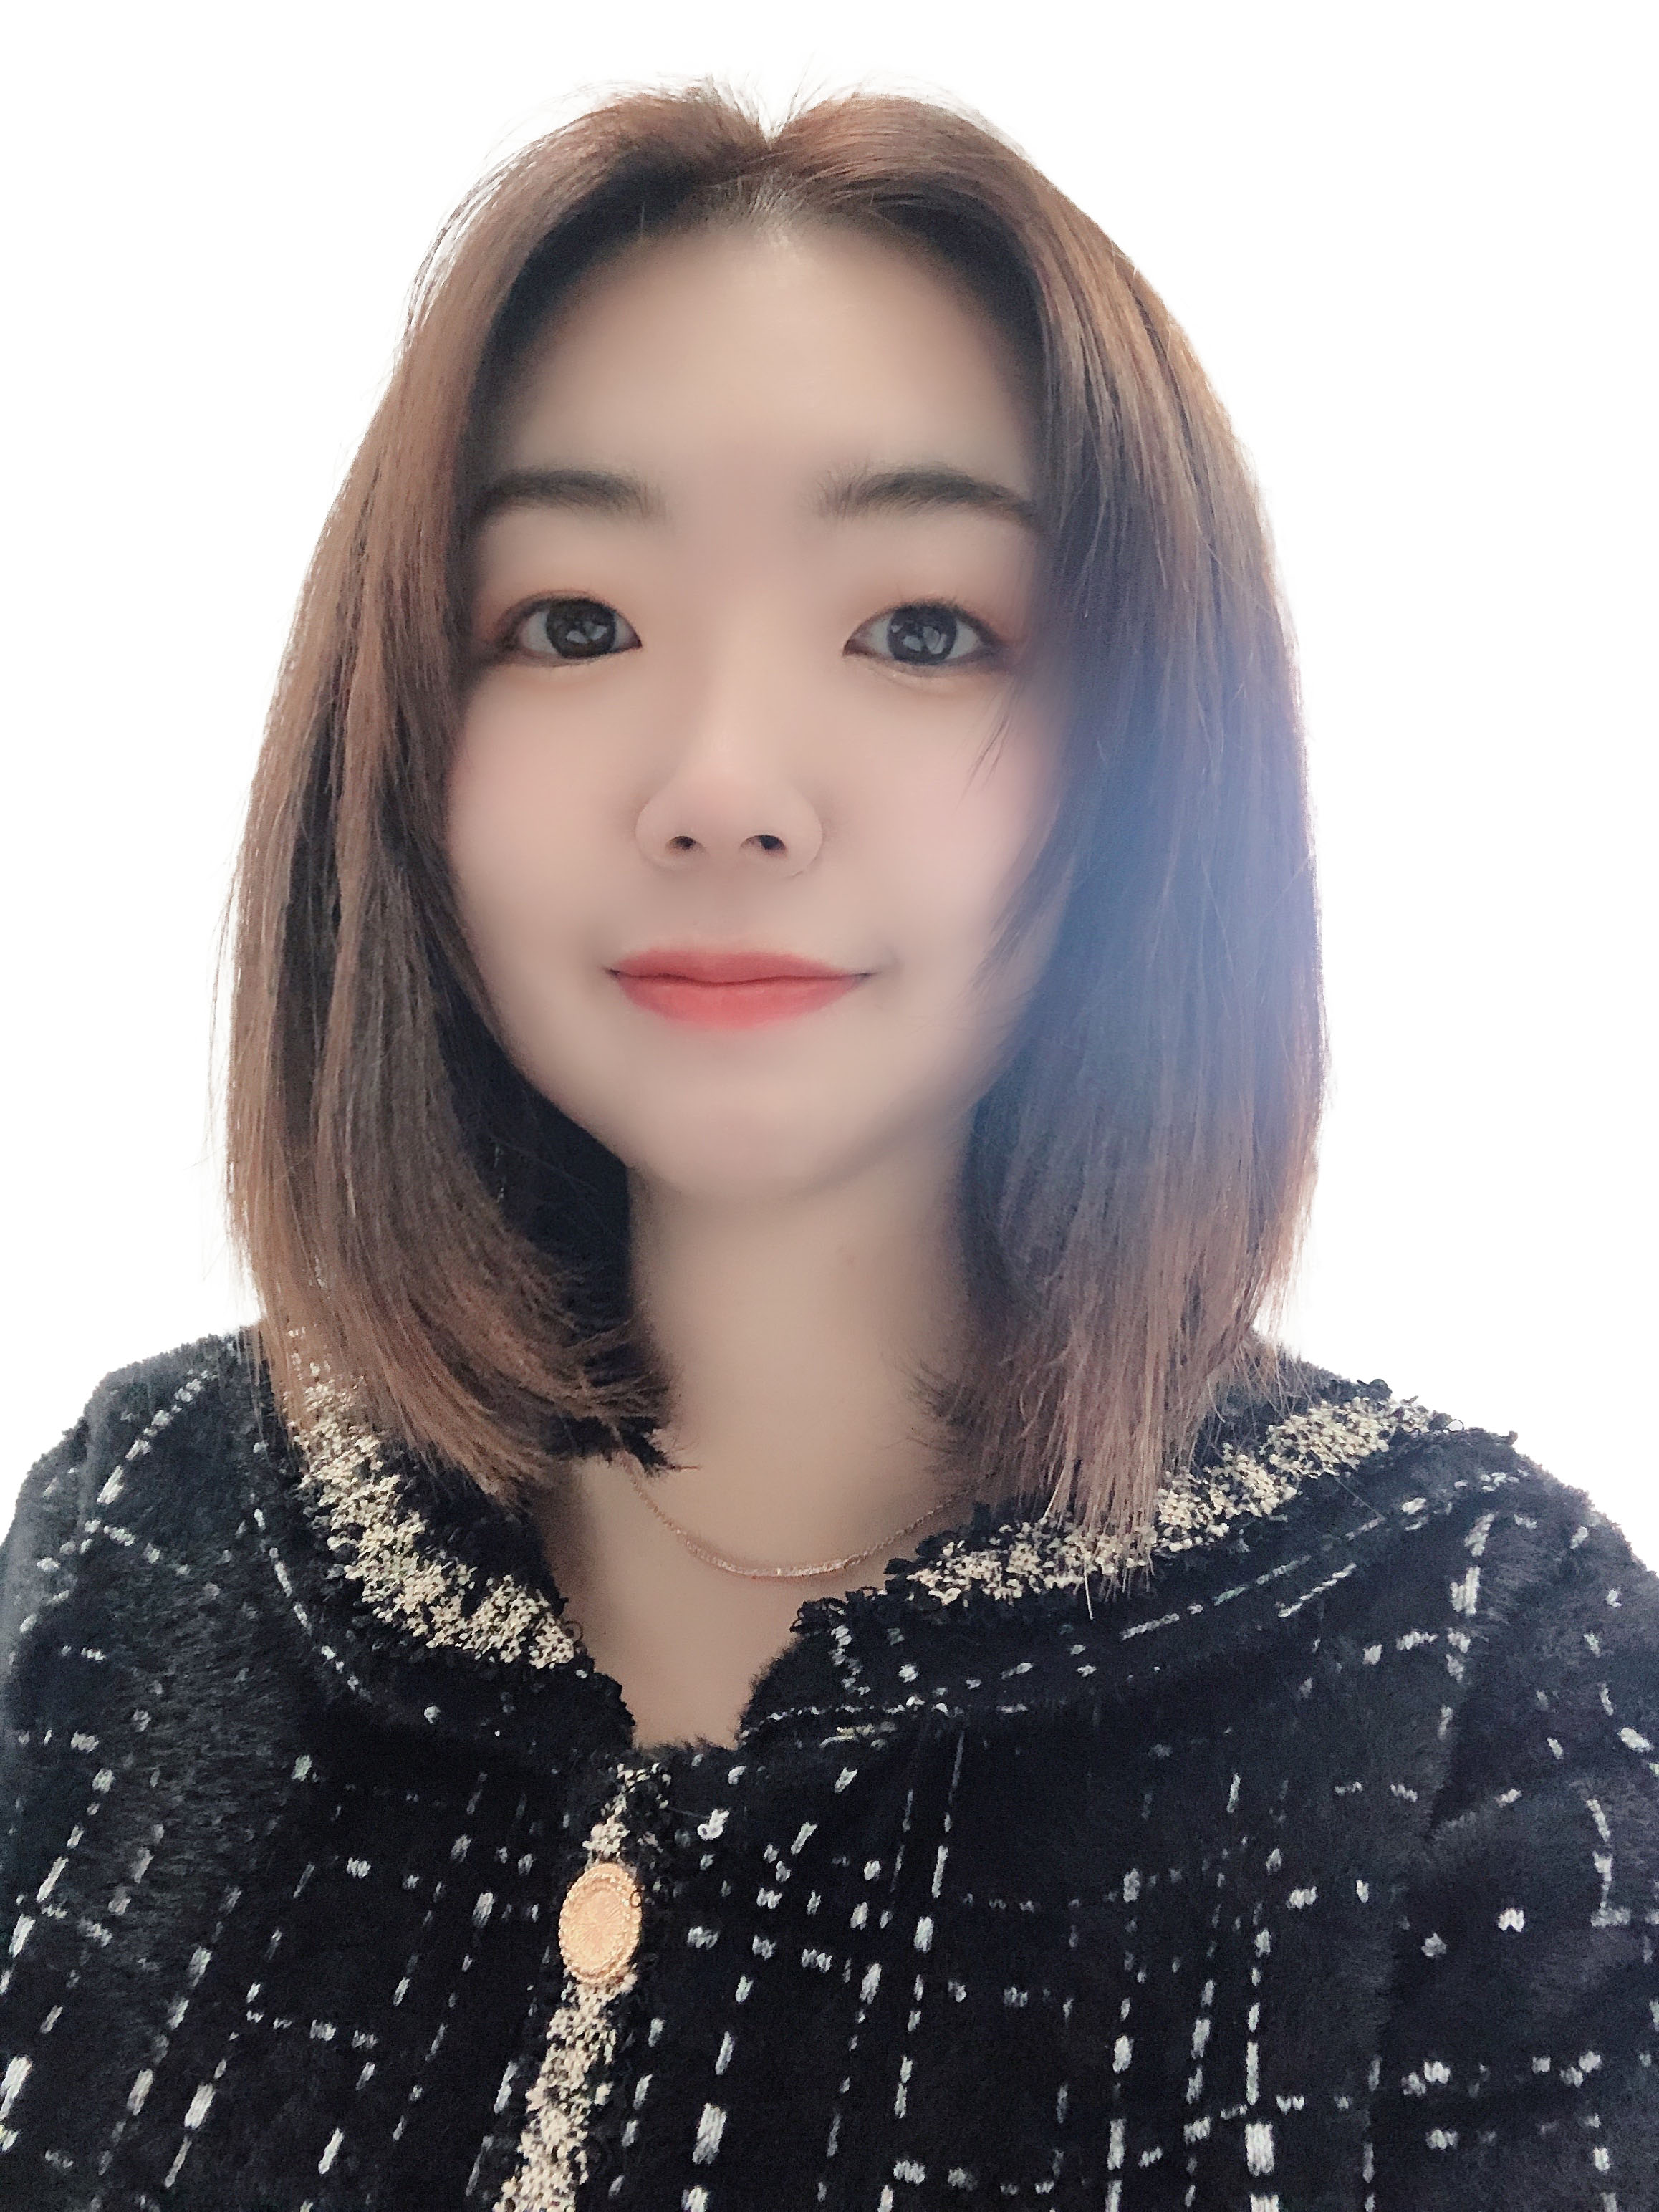 Xueqing Cai
					Director | VP Client Relationship
					London, UK